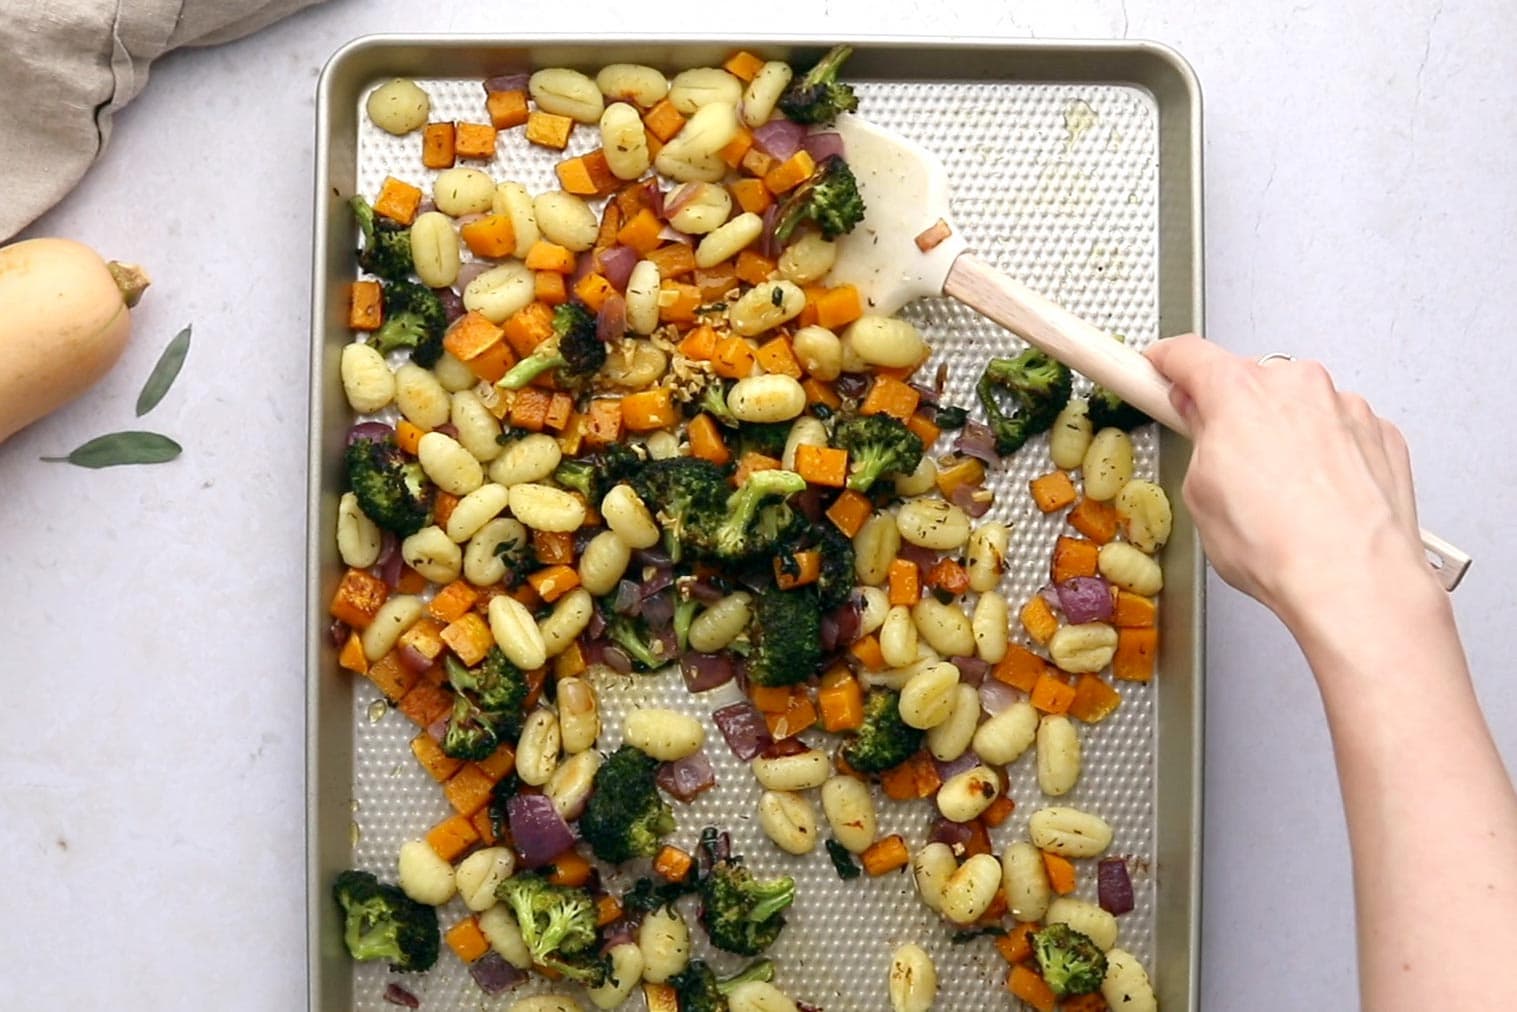 tossing sheet pan gnocchi and vegetables in brown butter sage sauce using a white spatula